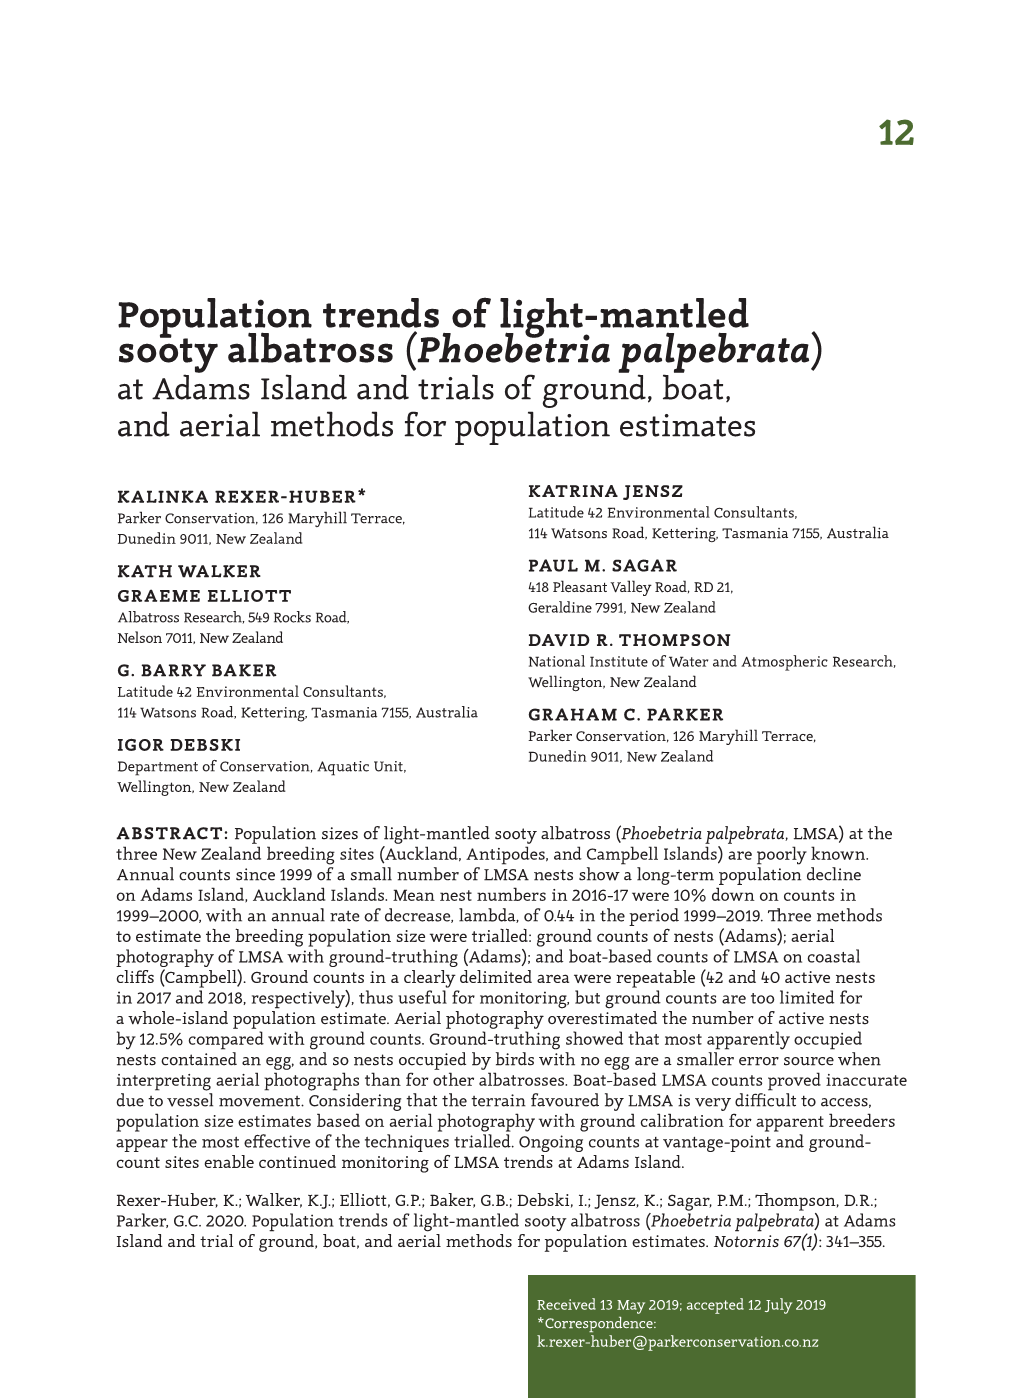 Population Trends of Light-Mantled Sooty Albatross (Phoebetria Palpebrata) at Adams Island and Trials of Ground, Boat, and Aerial Methods for Population Estimates